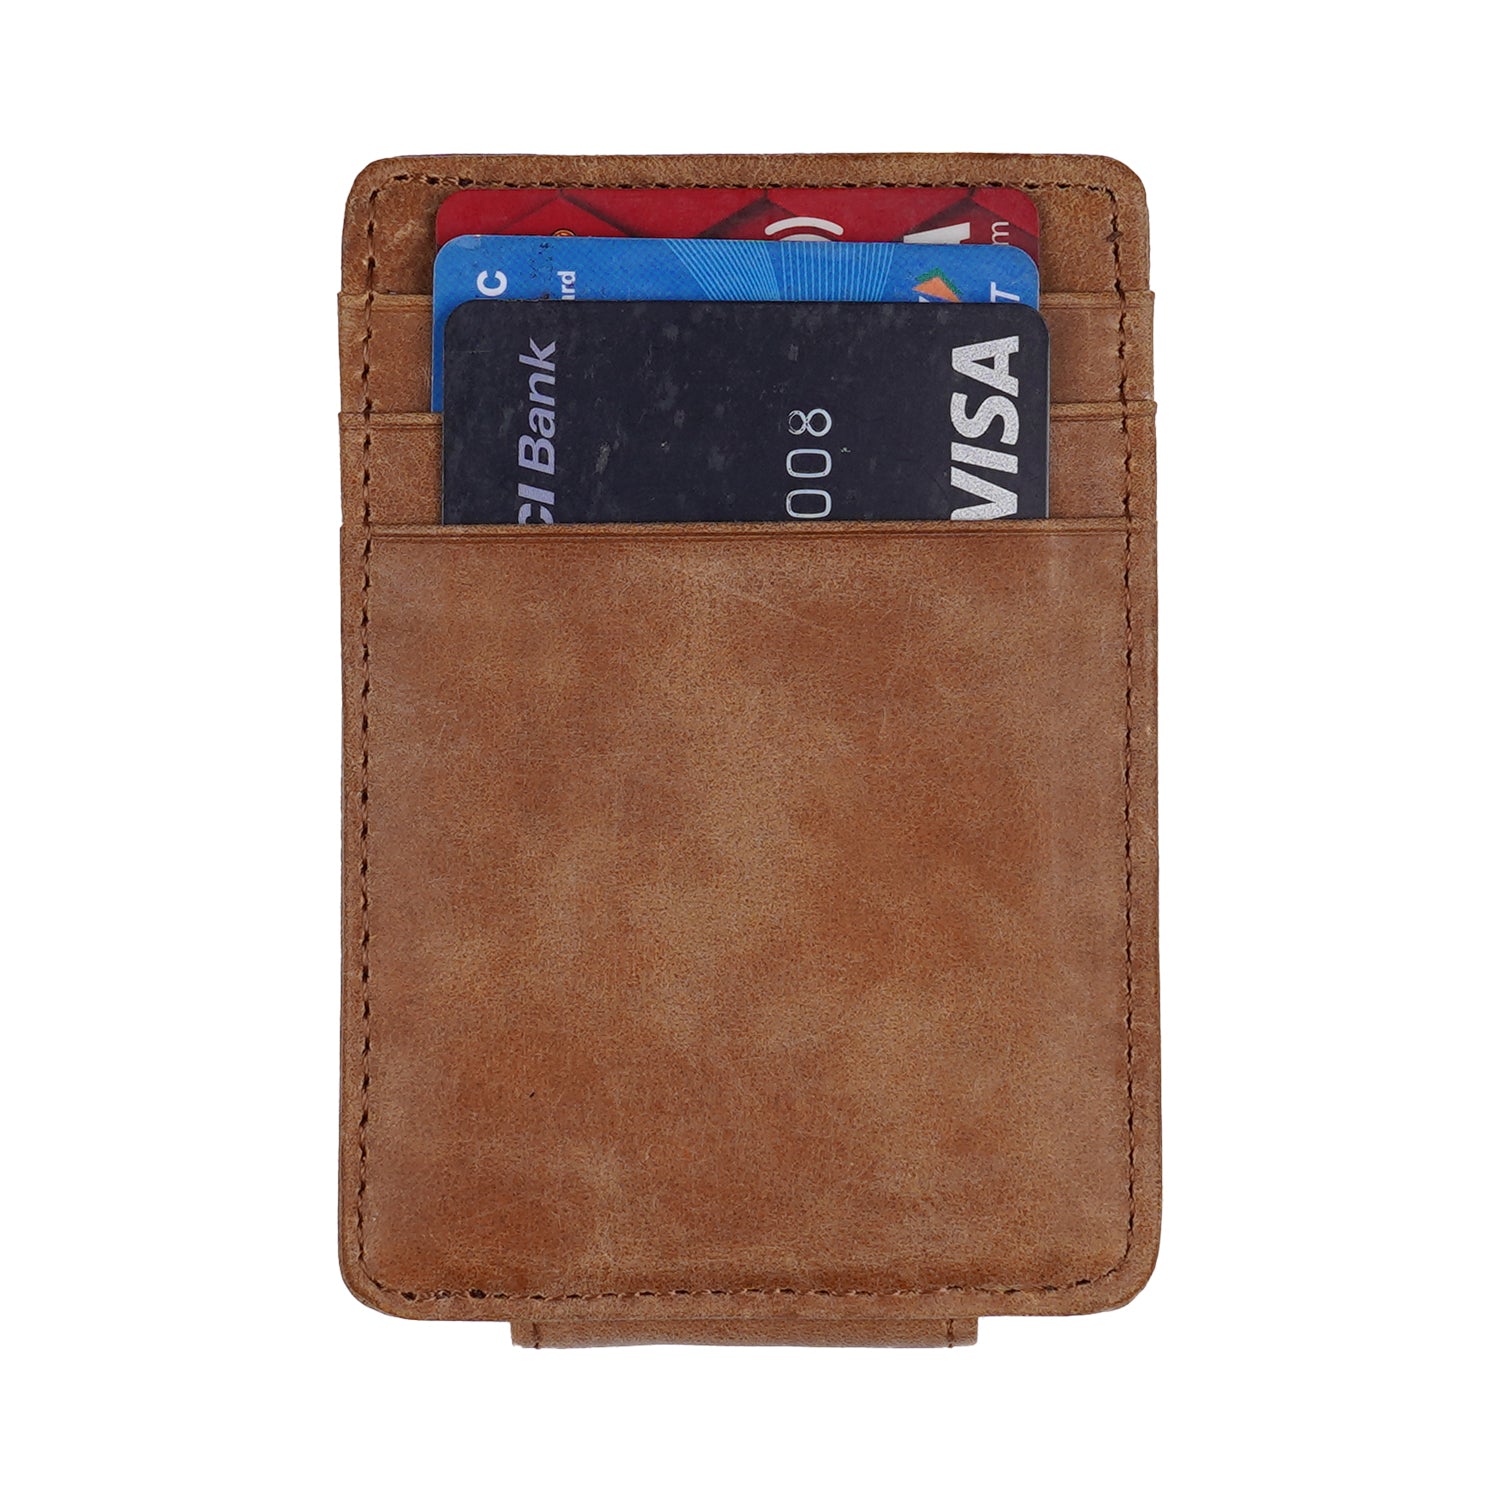 Cognac Crunch Leather Money Clip Gift Pack